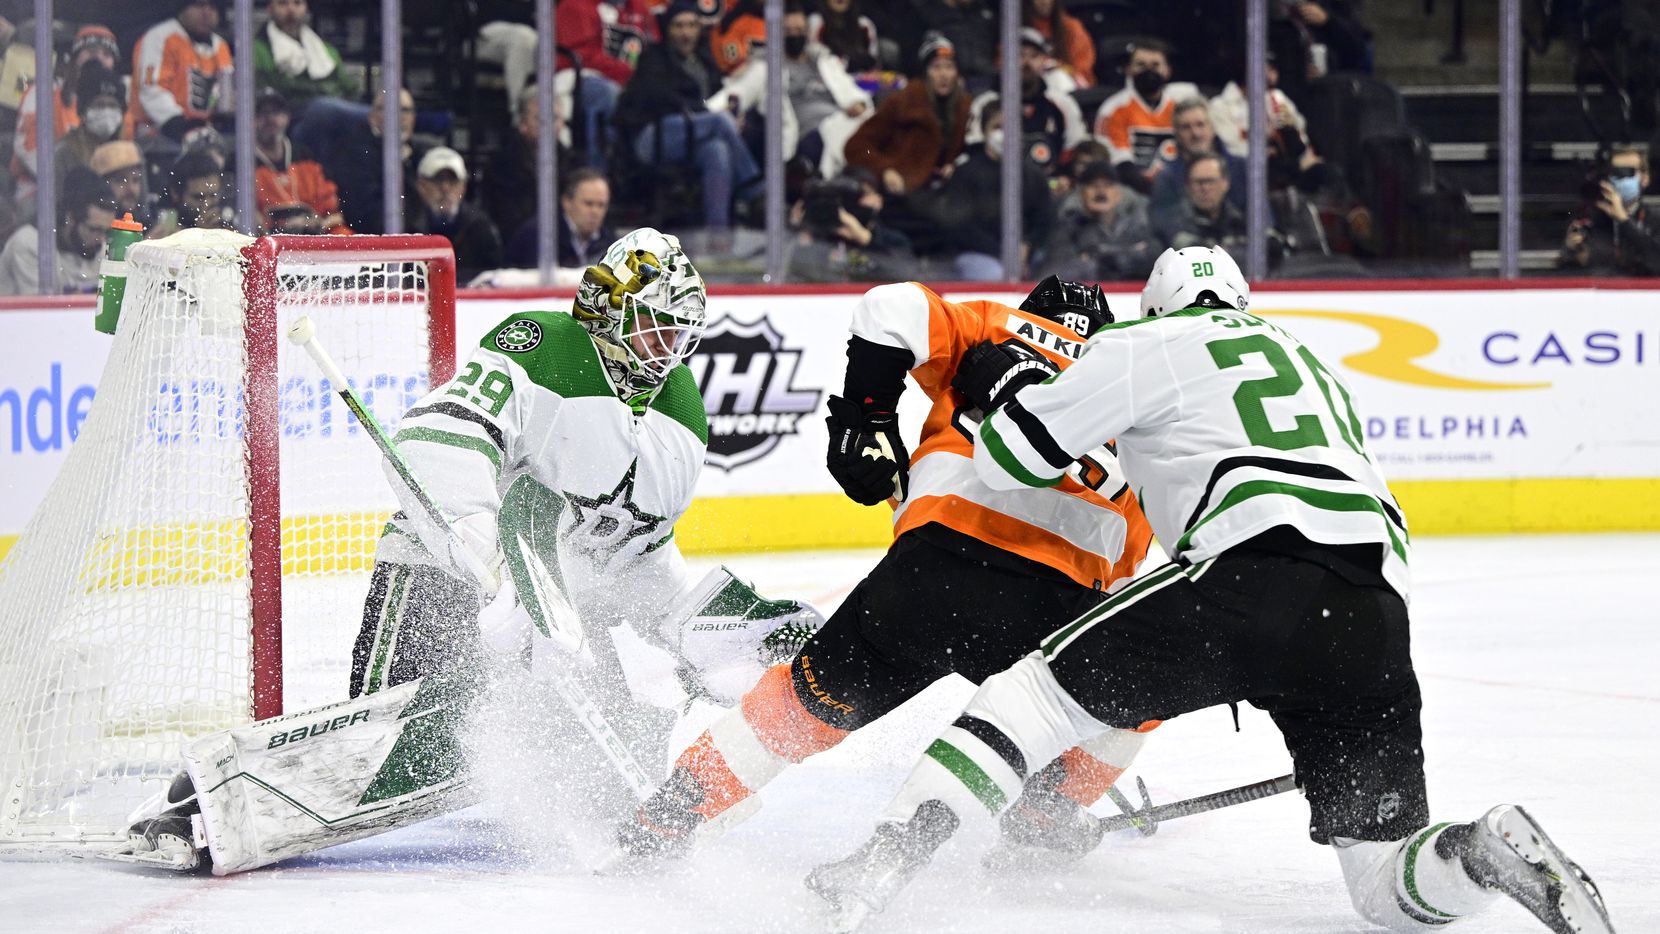 Stars Defeat Flyers in Philly with Third Period Goals